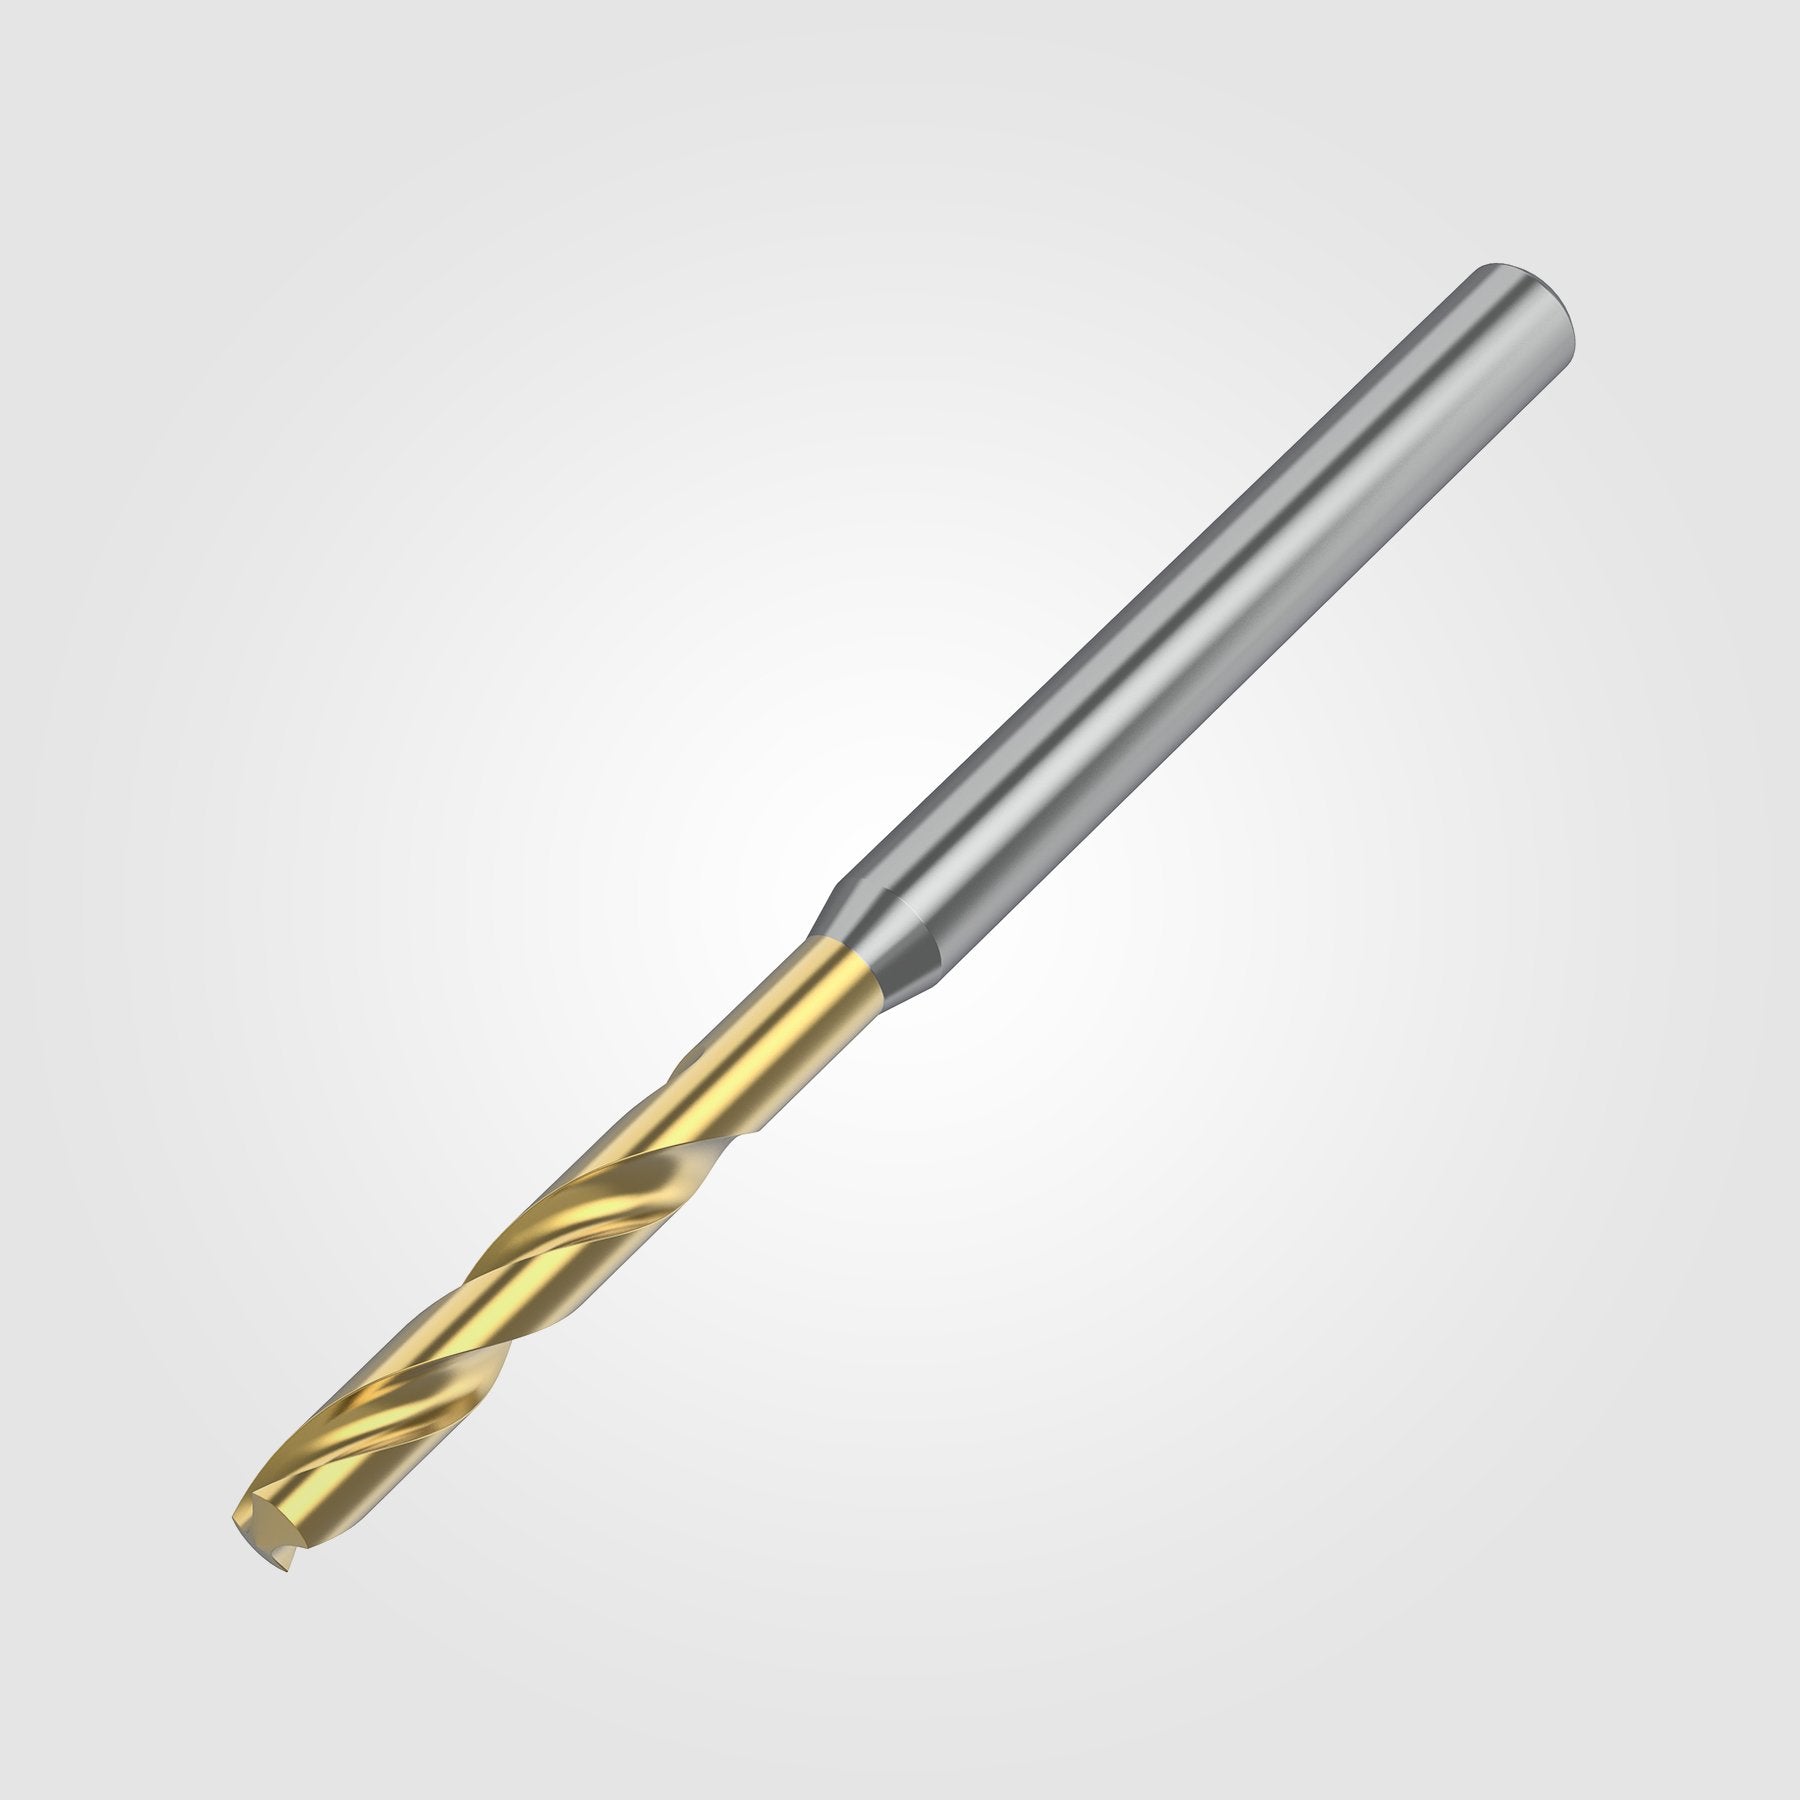 GOdrill (THROUGH COOLANT) | 4.3mm / .1693" / 3xD | SOLID CARBIDE DRILL | 4151123